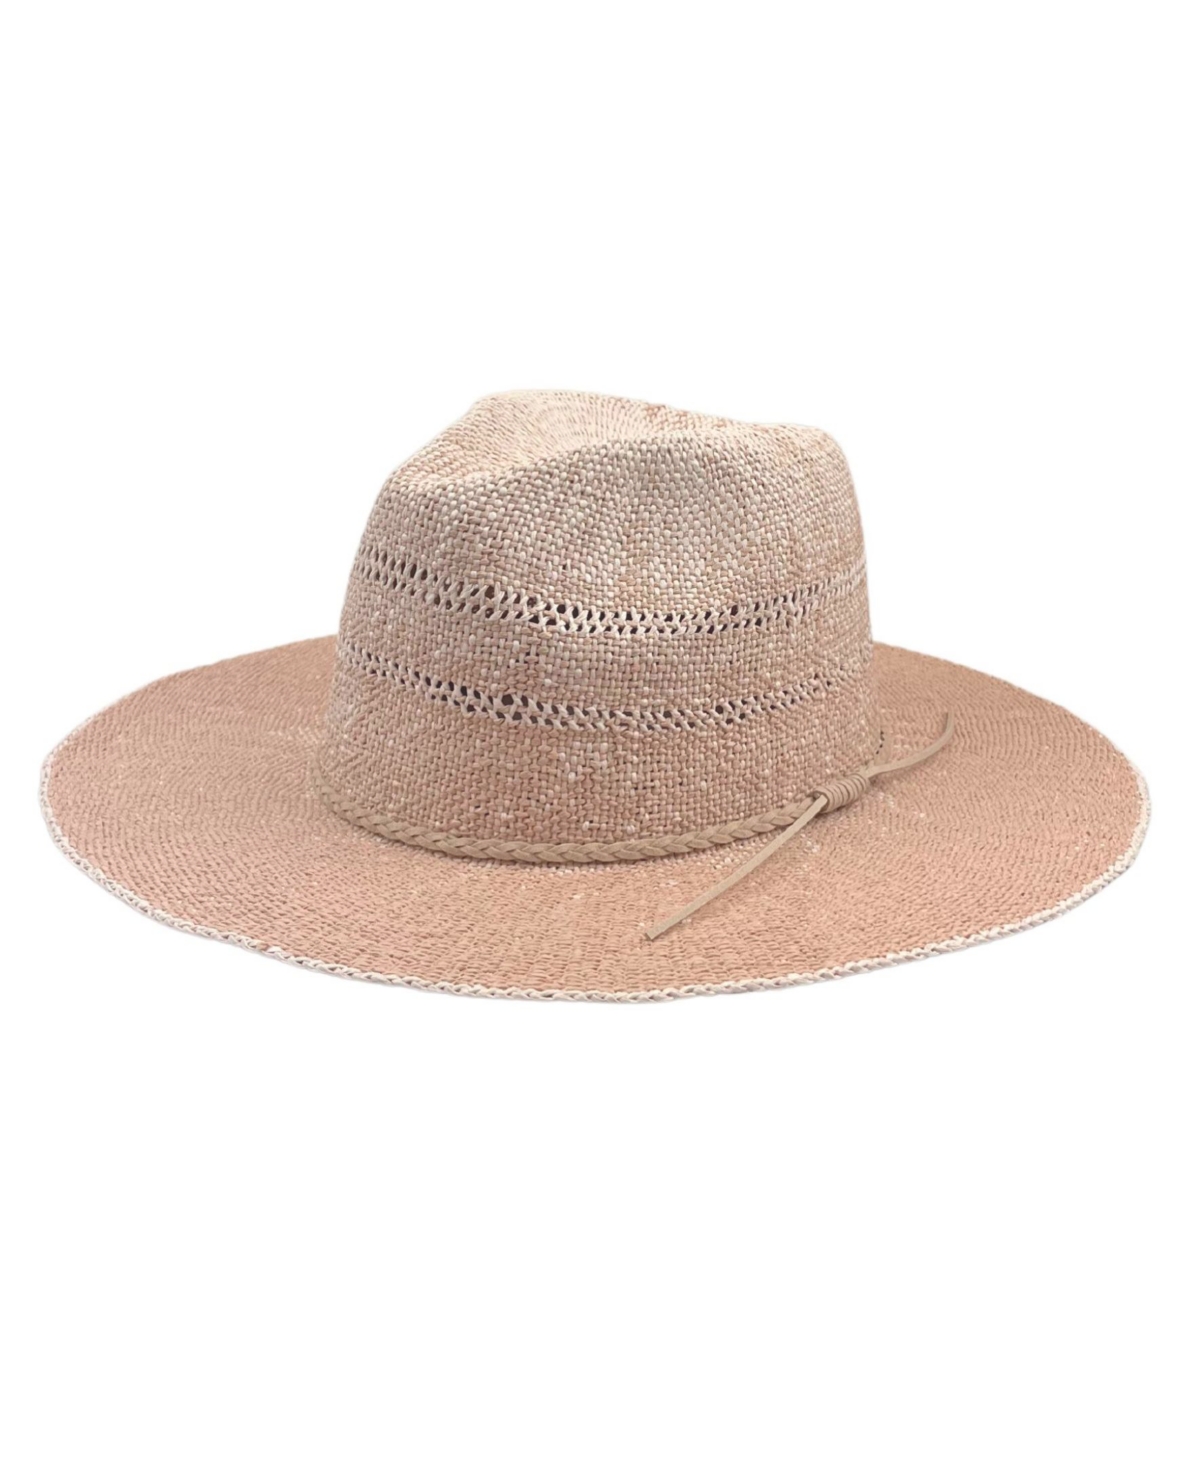 Shop Marcus Adler Women's Straw Panama Hat With Suede Braided Trim In Blush